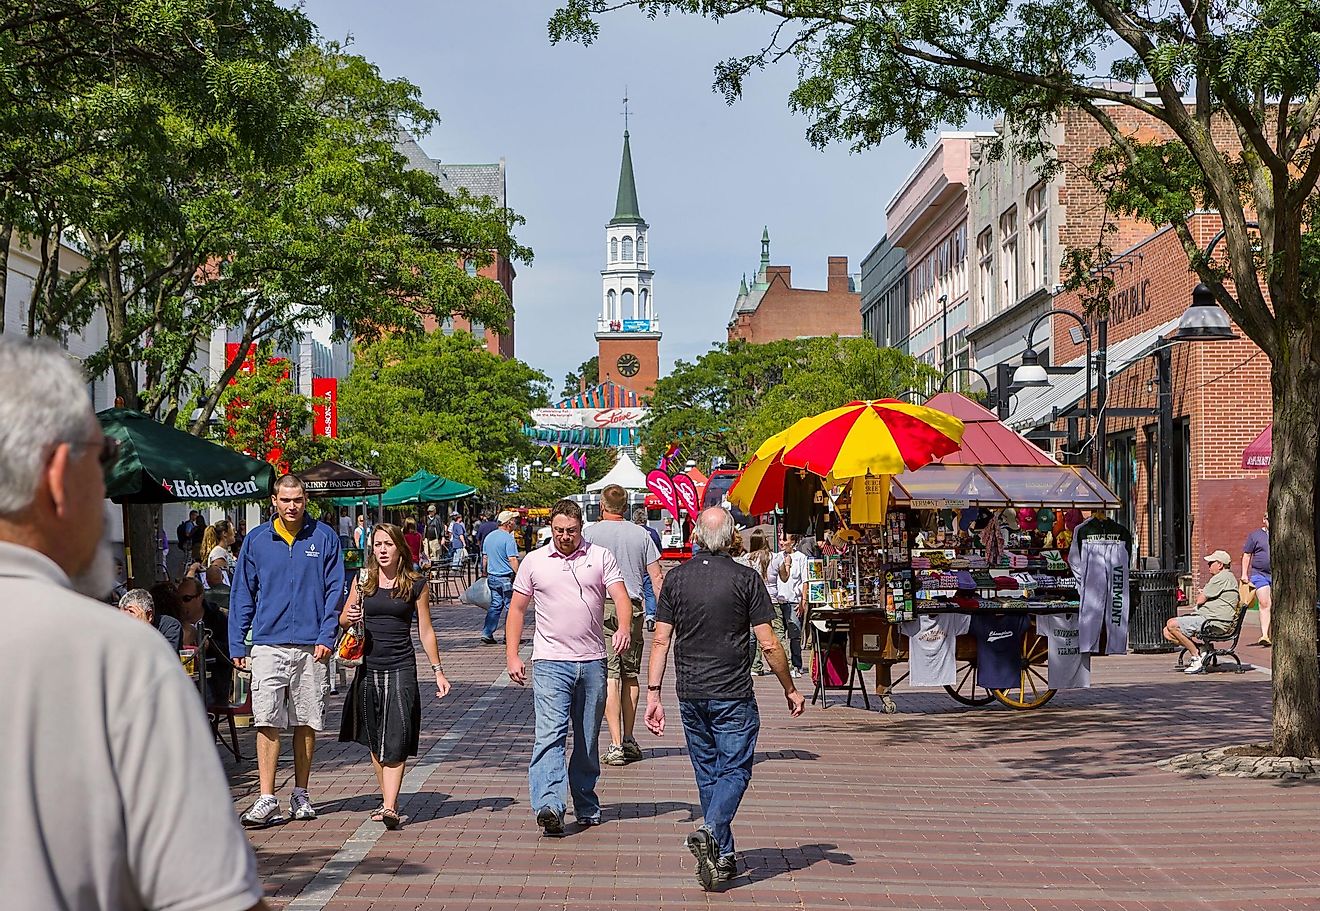 People on Church Street, a pedestrian mall with sidewalk cafes and restaurants.